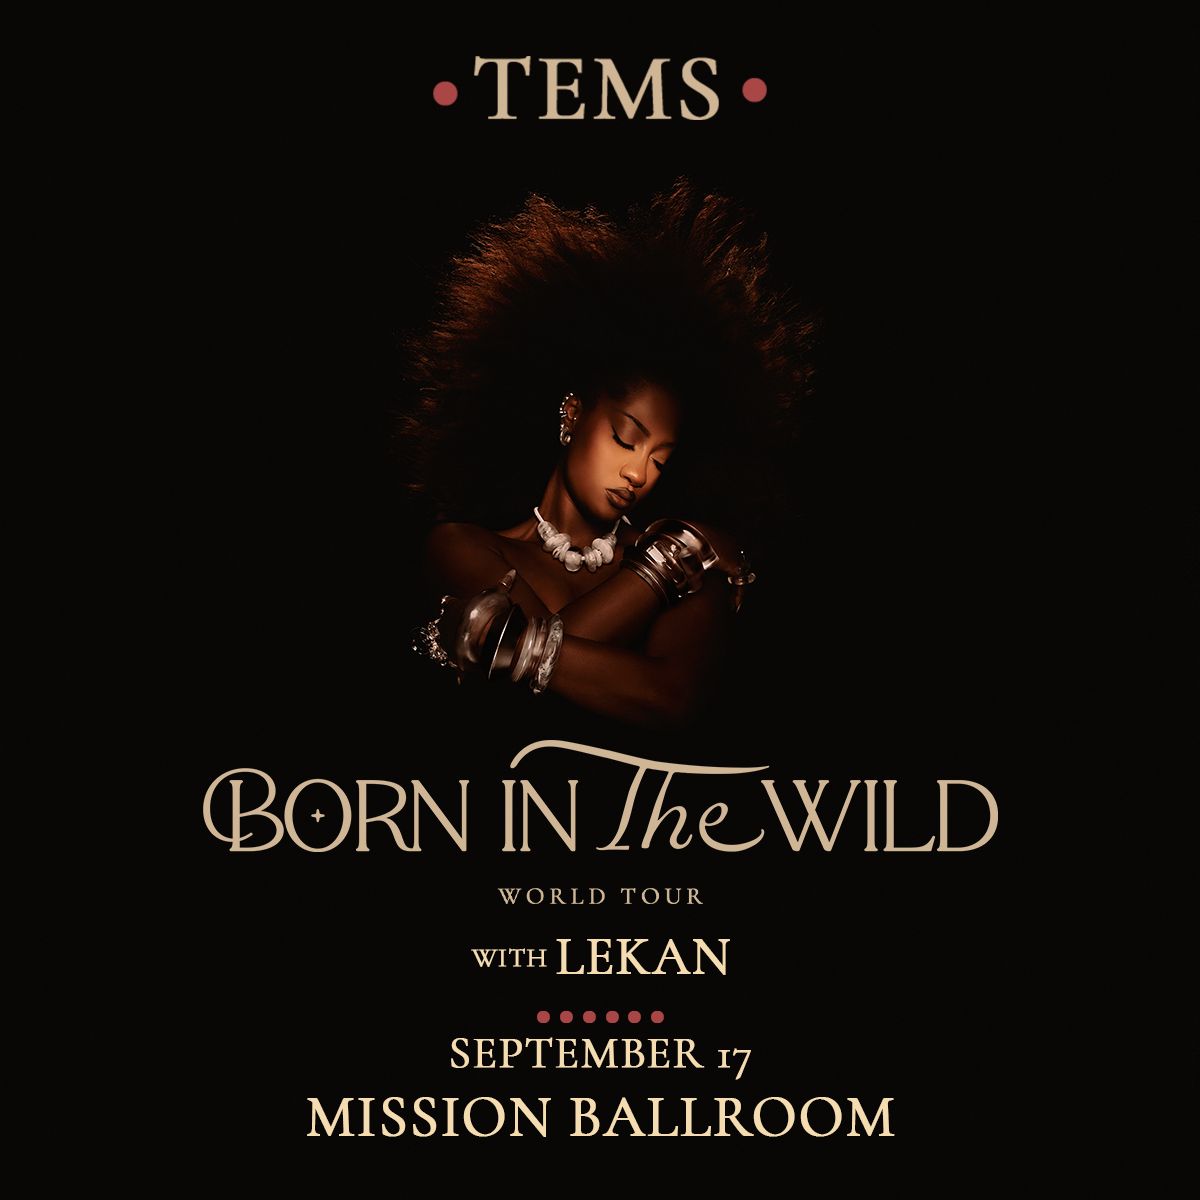 ✨SHOW ALERT!✨ Party Guru Productions welcomes you to join us for The Born in the Wild World Tour ft TEMS with Lekan on September 17th at Mission Ballroom! Pre-Sale: Thursday, May 16 from 10a – 10p MT Pre-Sale Password: LOVEME Tickets : loom.ly/fBq8iPU